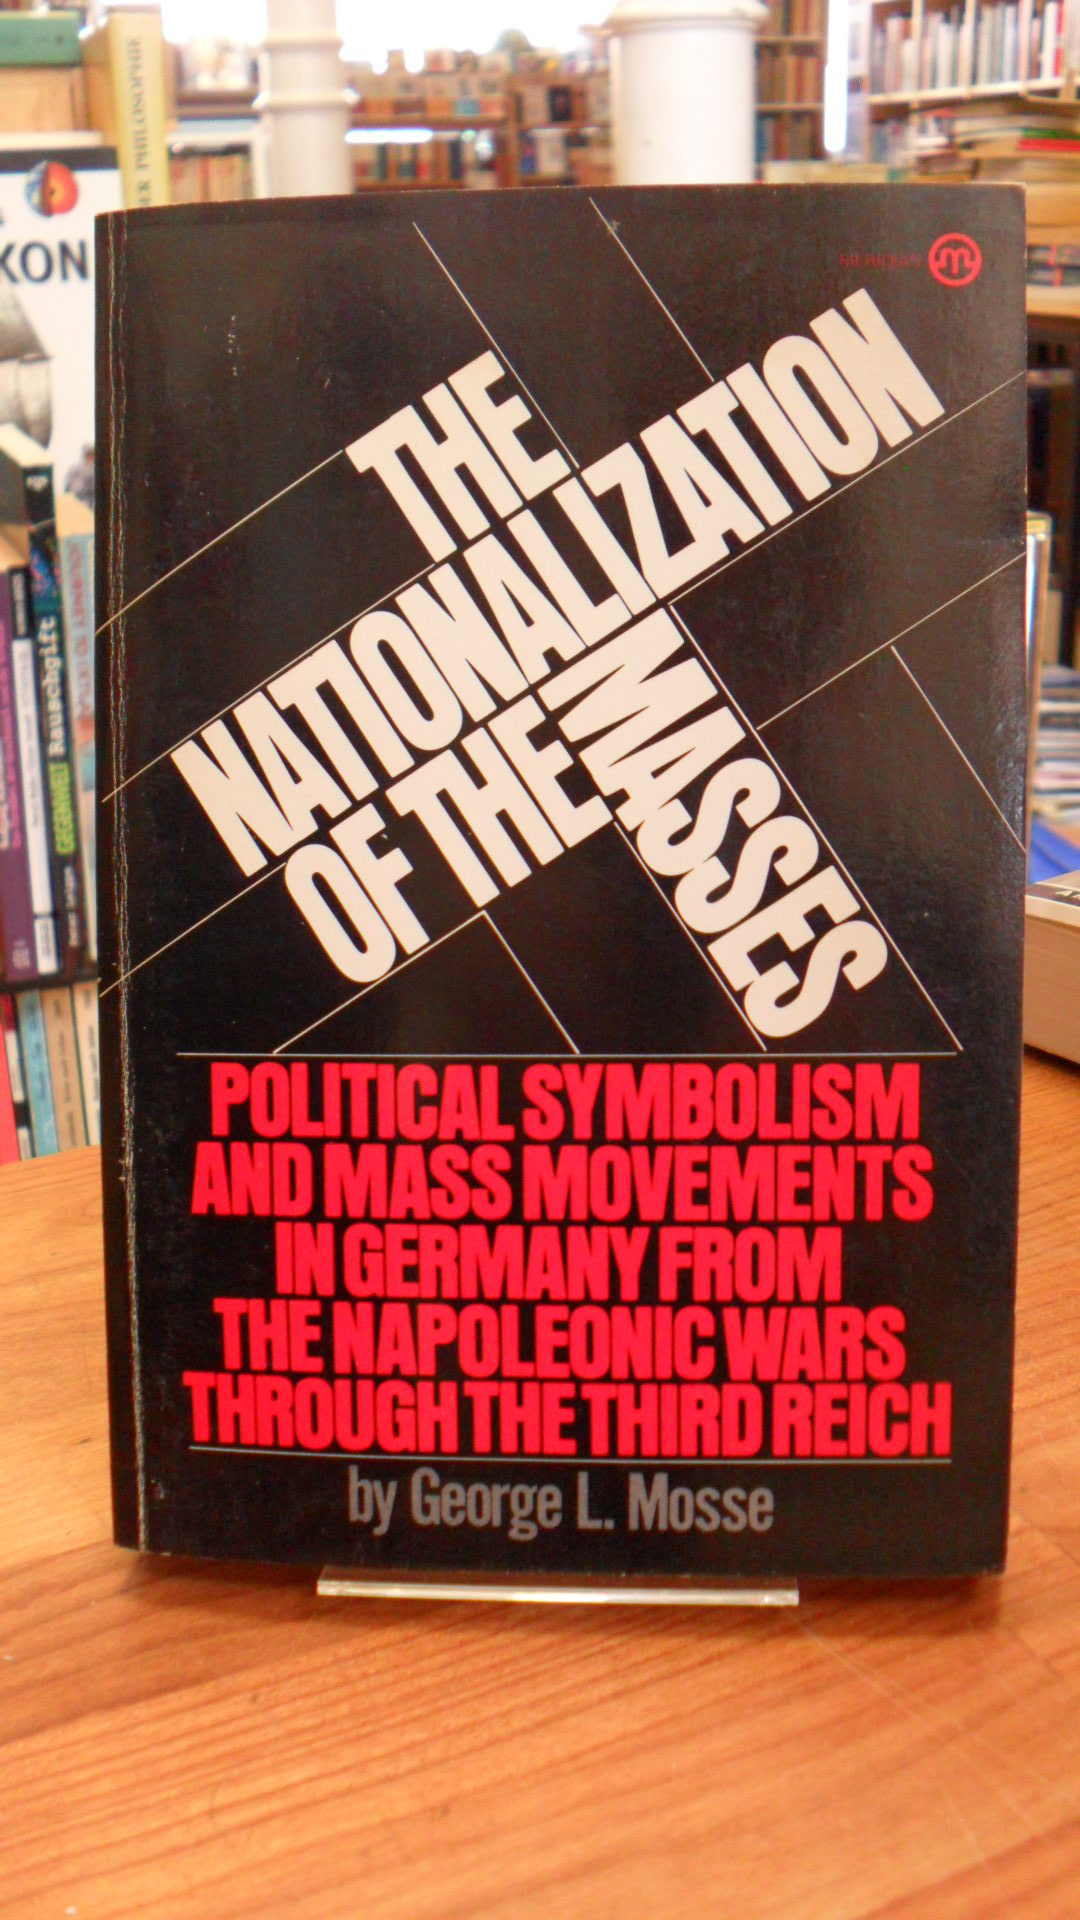 Mosse, Nationalization of the Masses: Political Symbolism and Mass Movements in